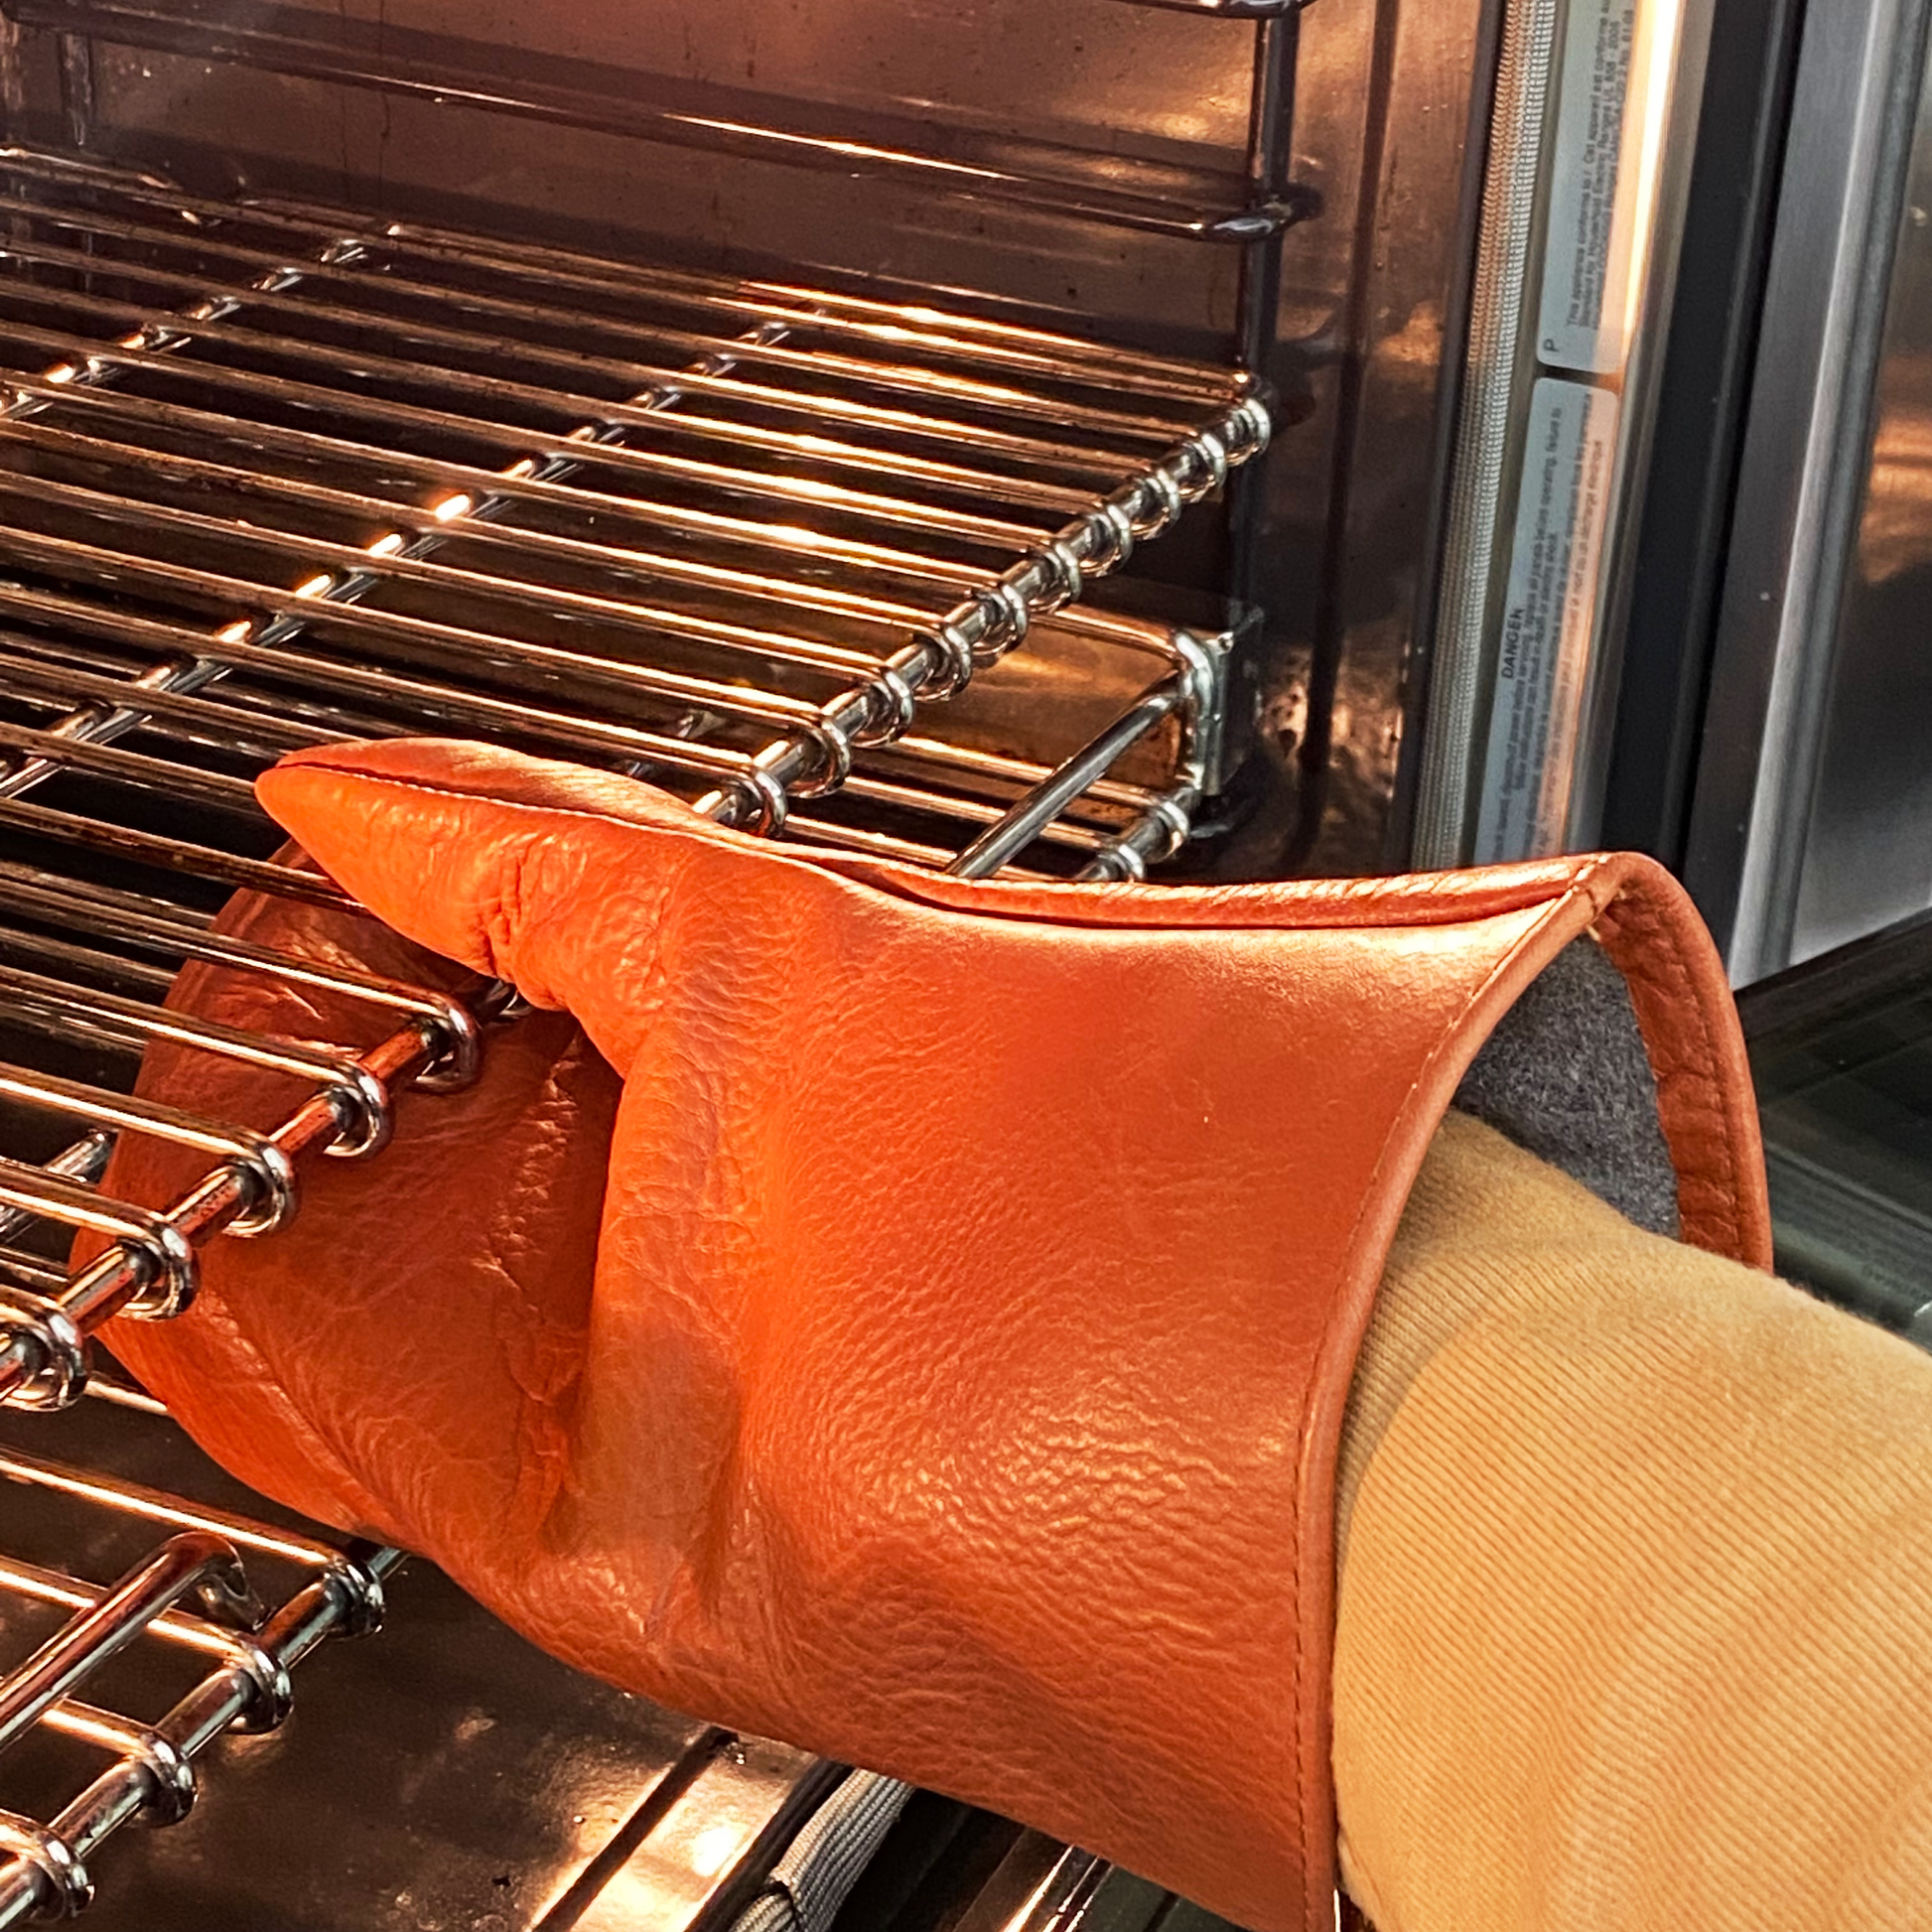 Premium Quality Buffalo Leather Oven Mitt for Use With Oven, Stove,  Fireplace or BBQ. This Luxury Leather Gift for Men is Made in Holland. 